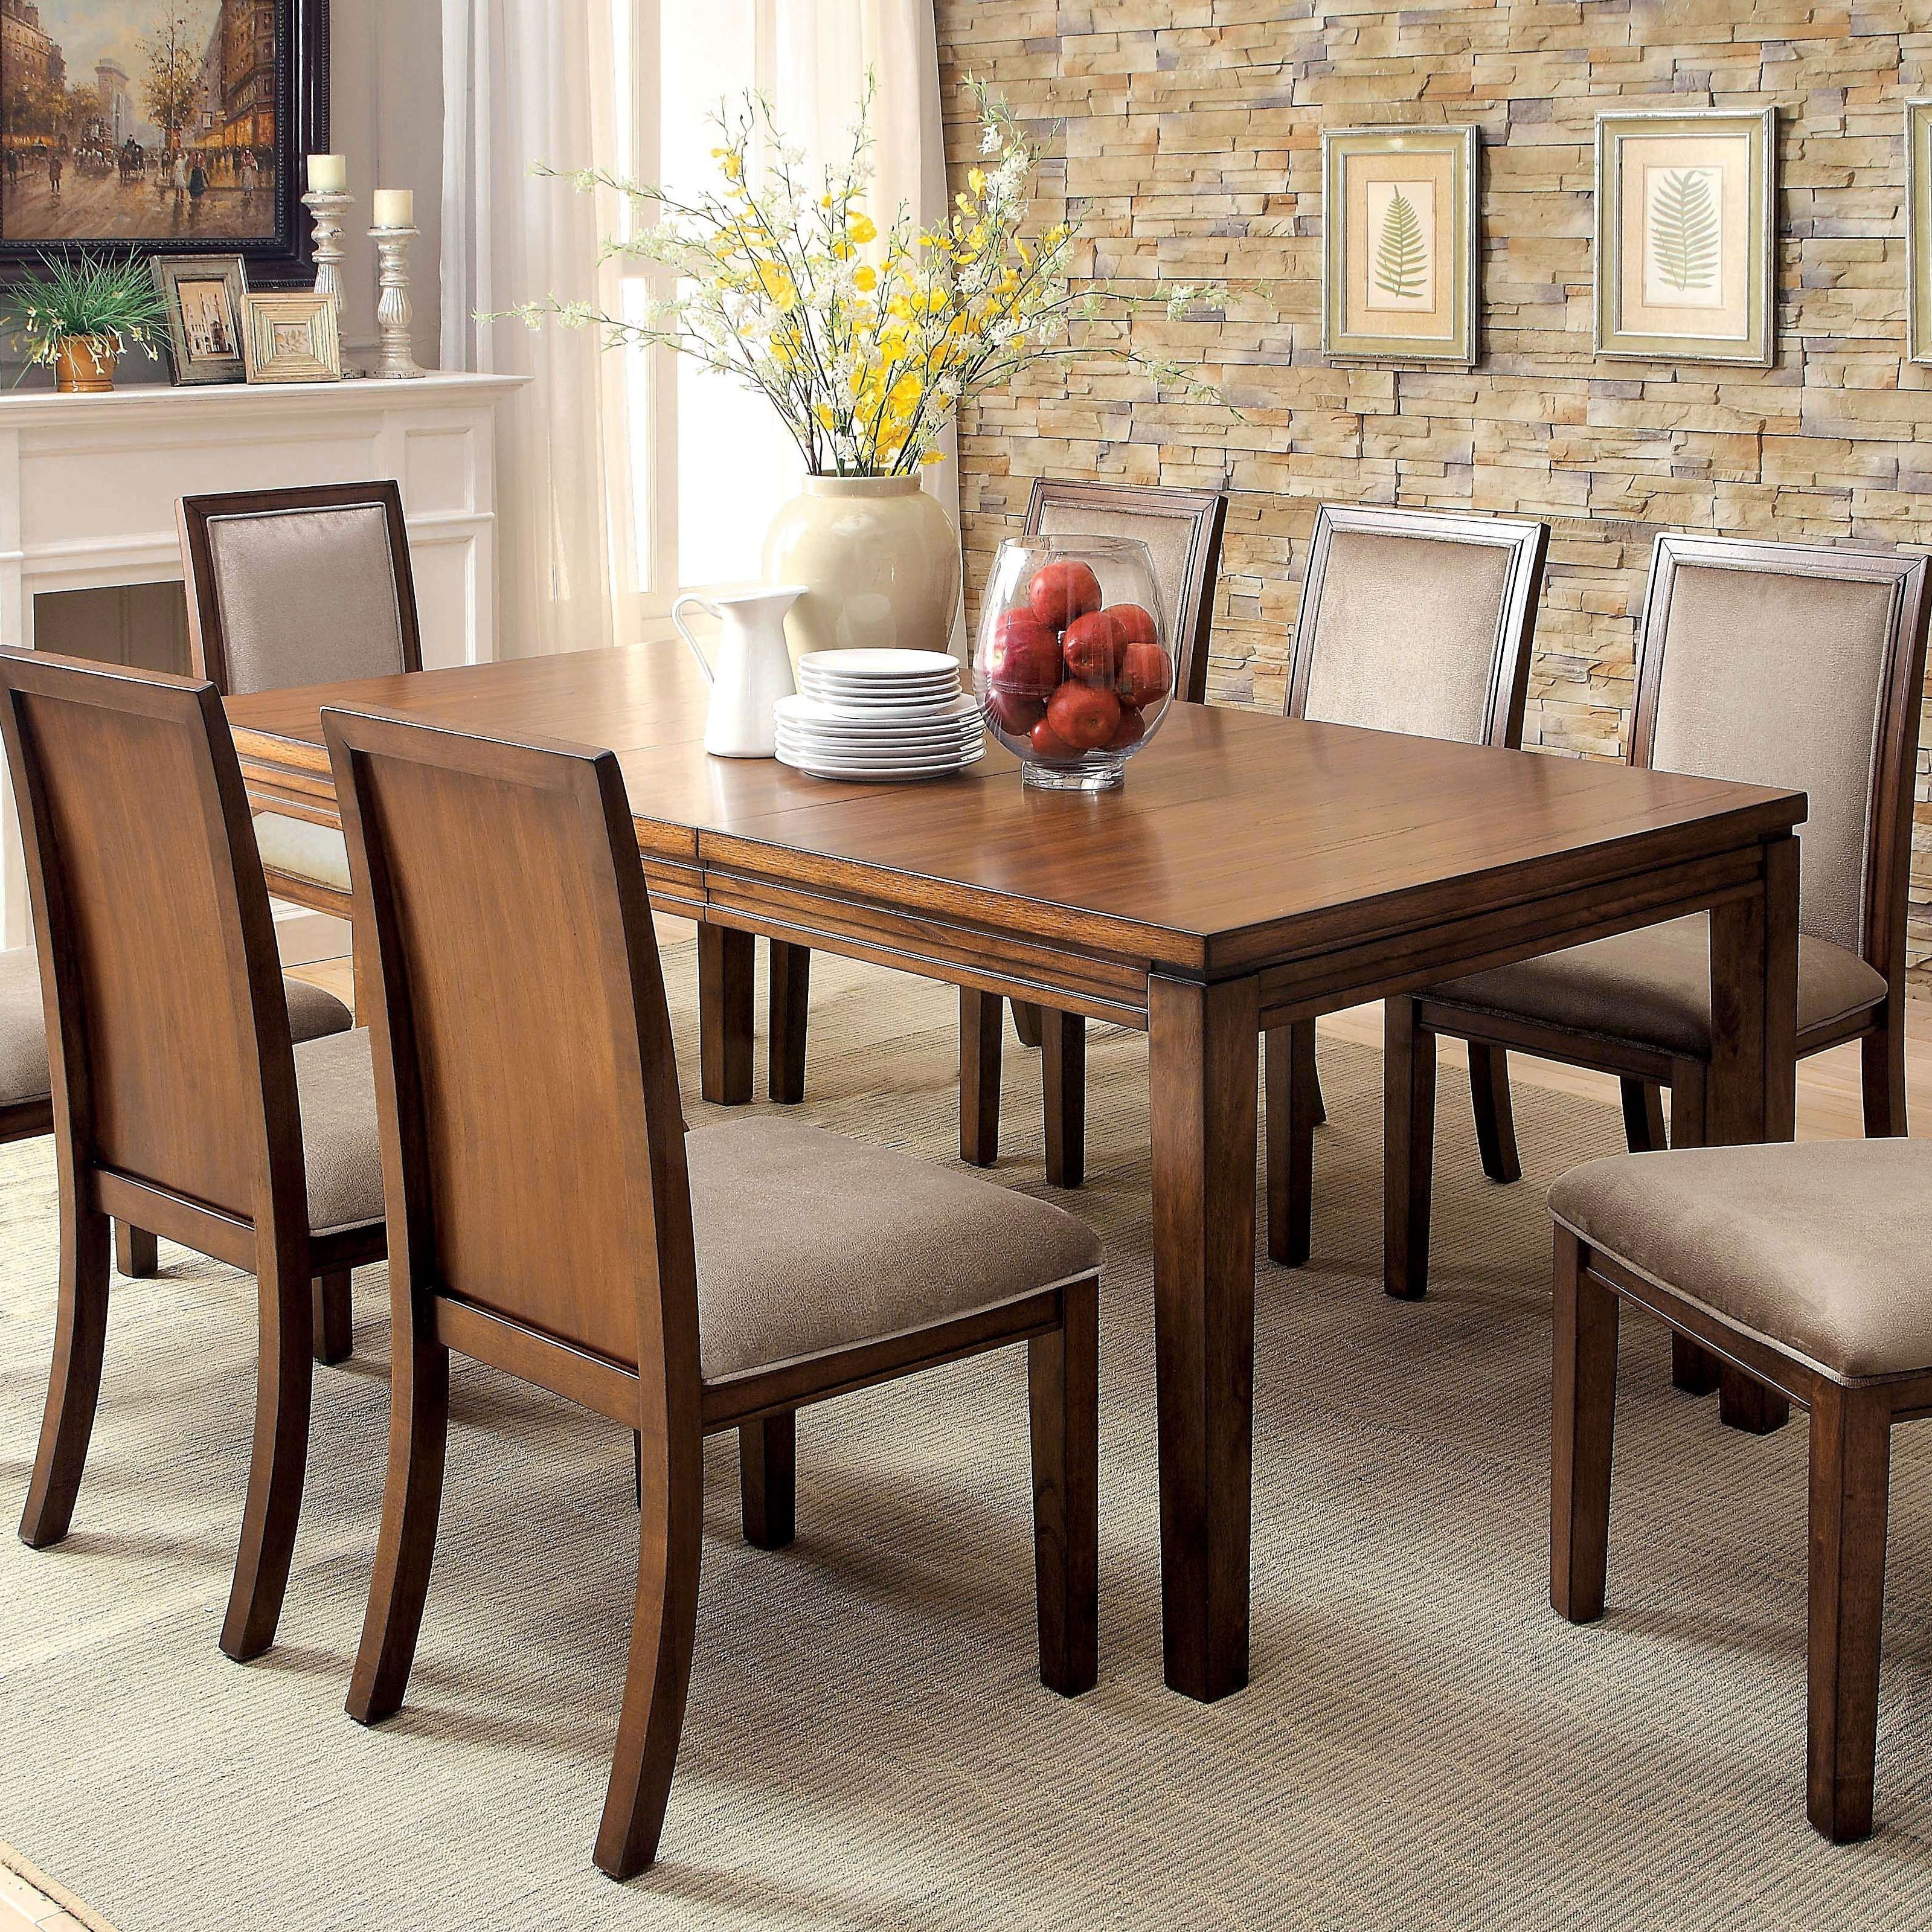 2018 Kingston Dining Tables And Chairs Inside Kingston Dining Room Table Elegant Furniture Of America Berla (View 23 of 25)